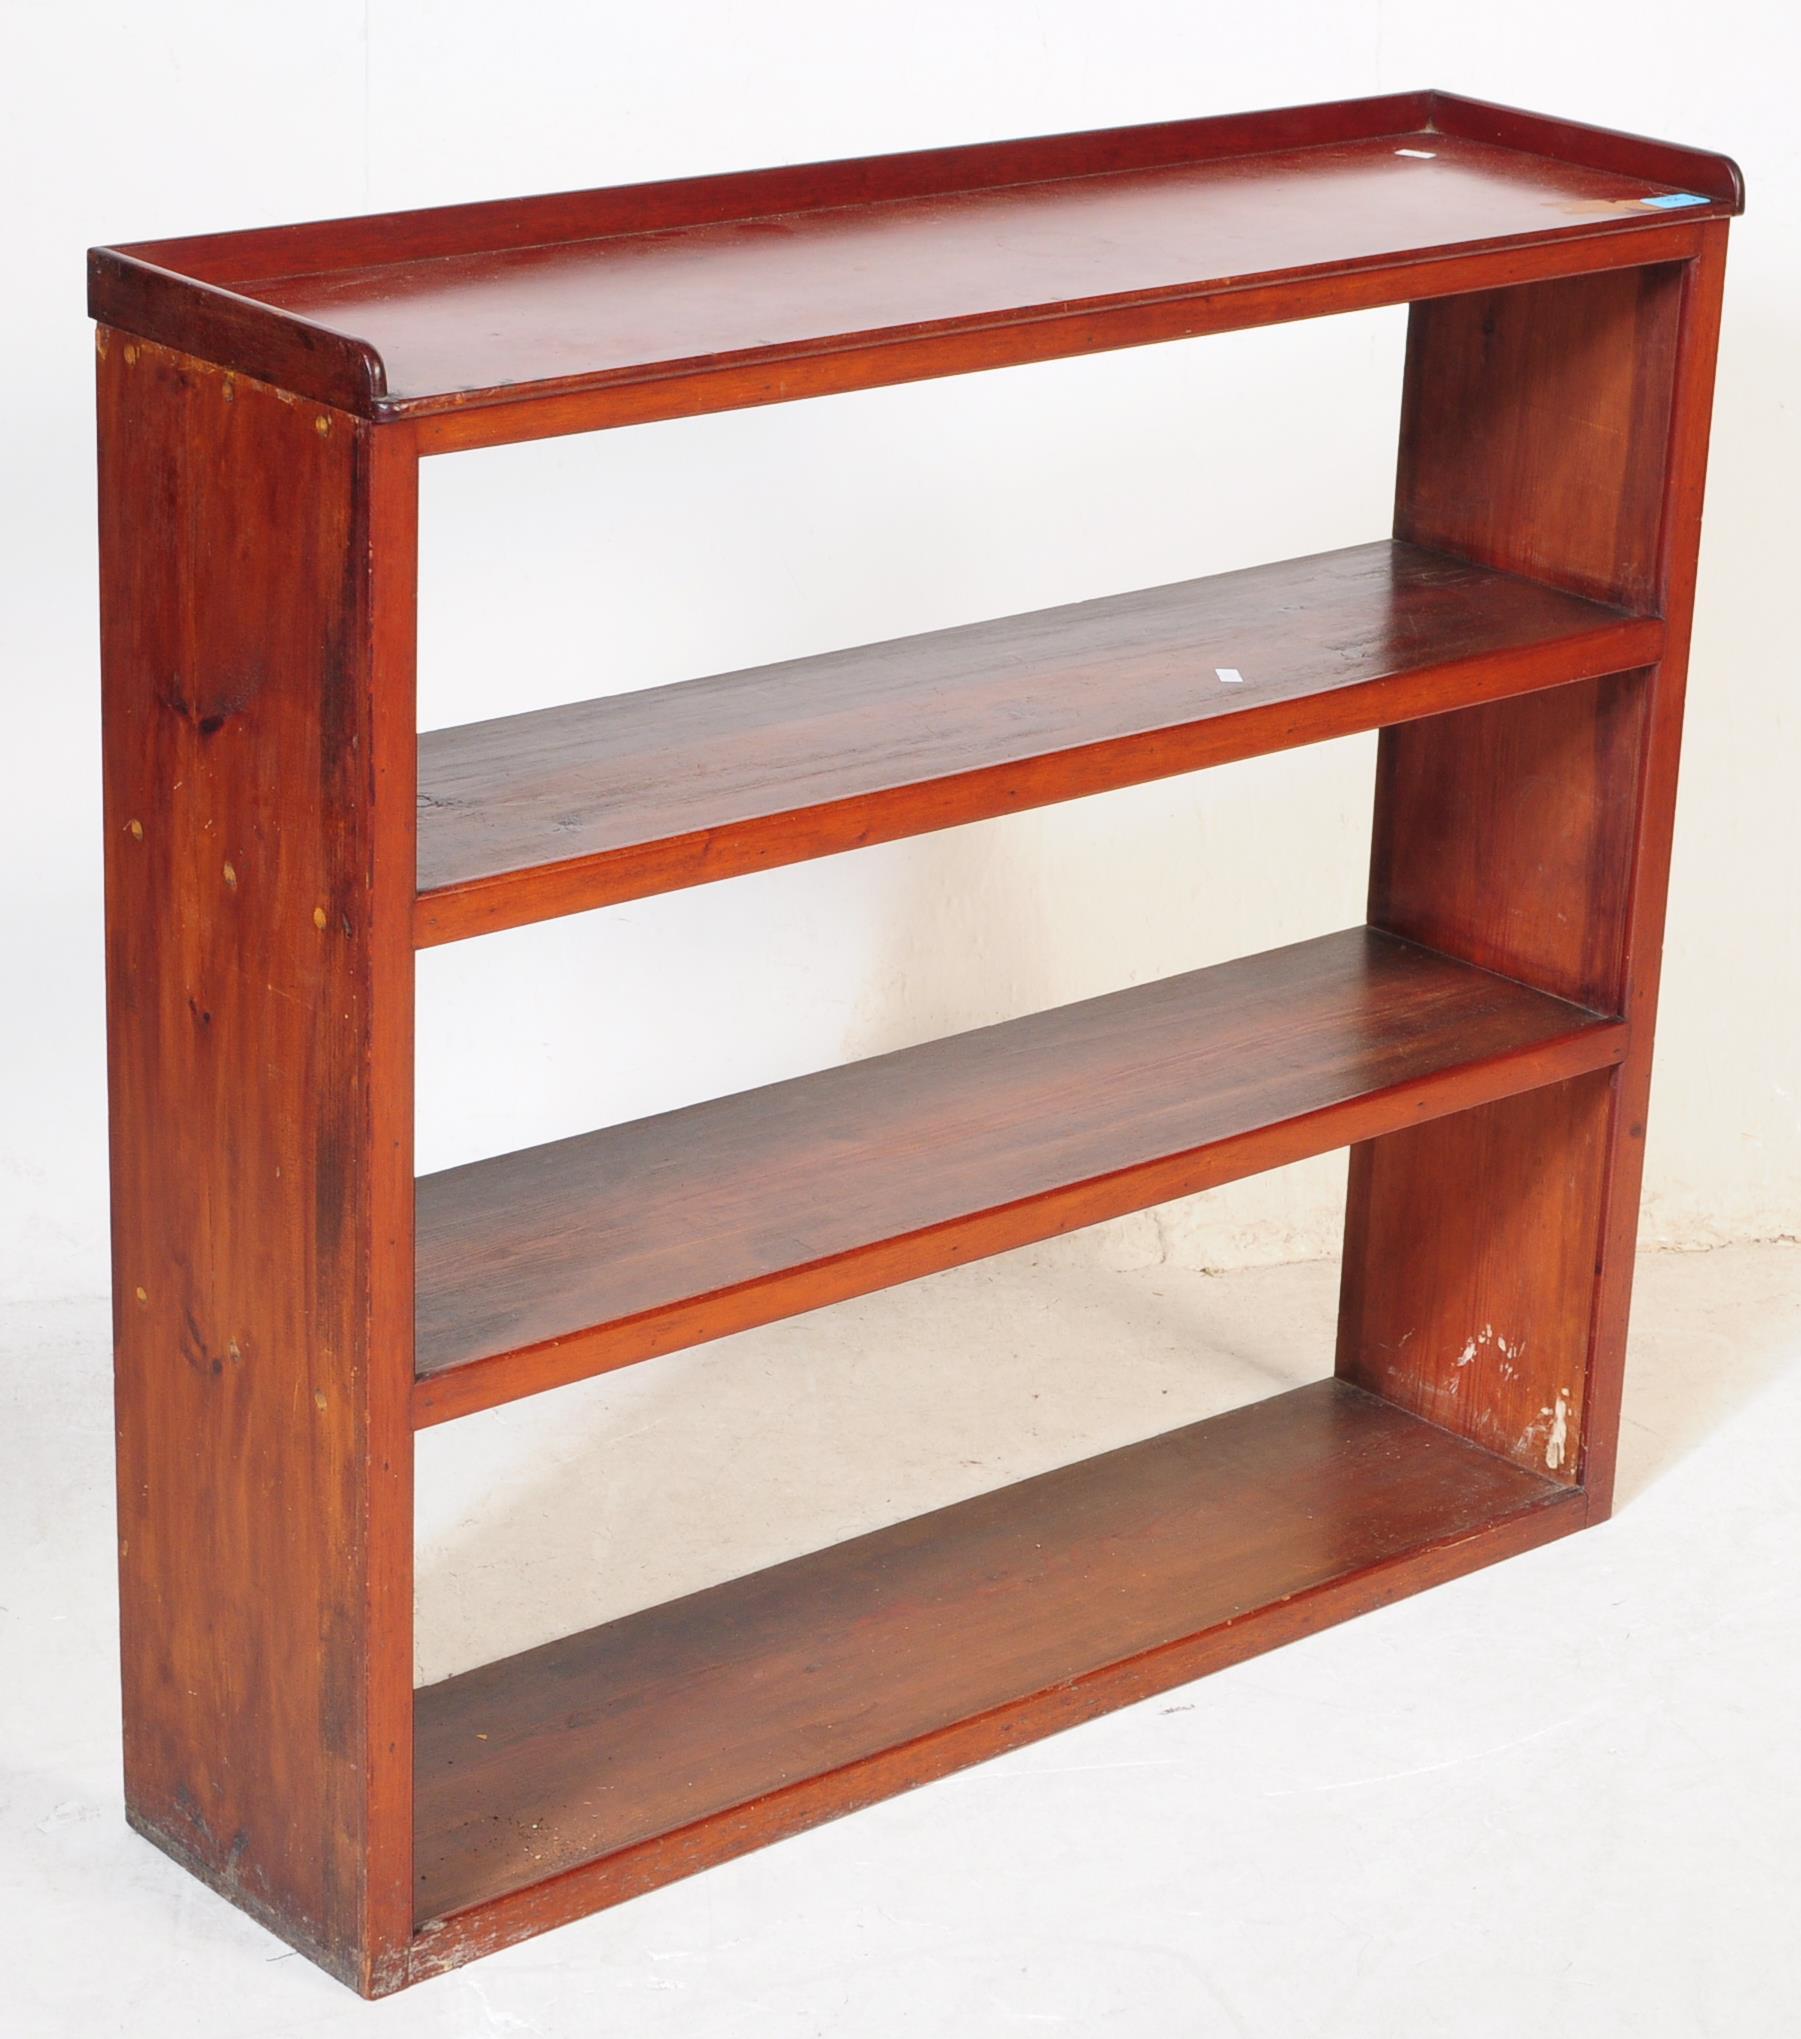 VINTAGE 20TH CENTURY MAHOGANY OPEN FACE BOOKCASE - Image 2 of 5